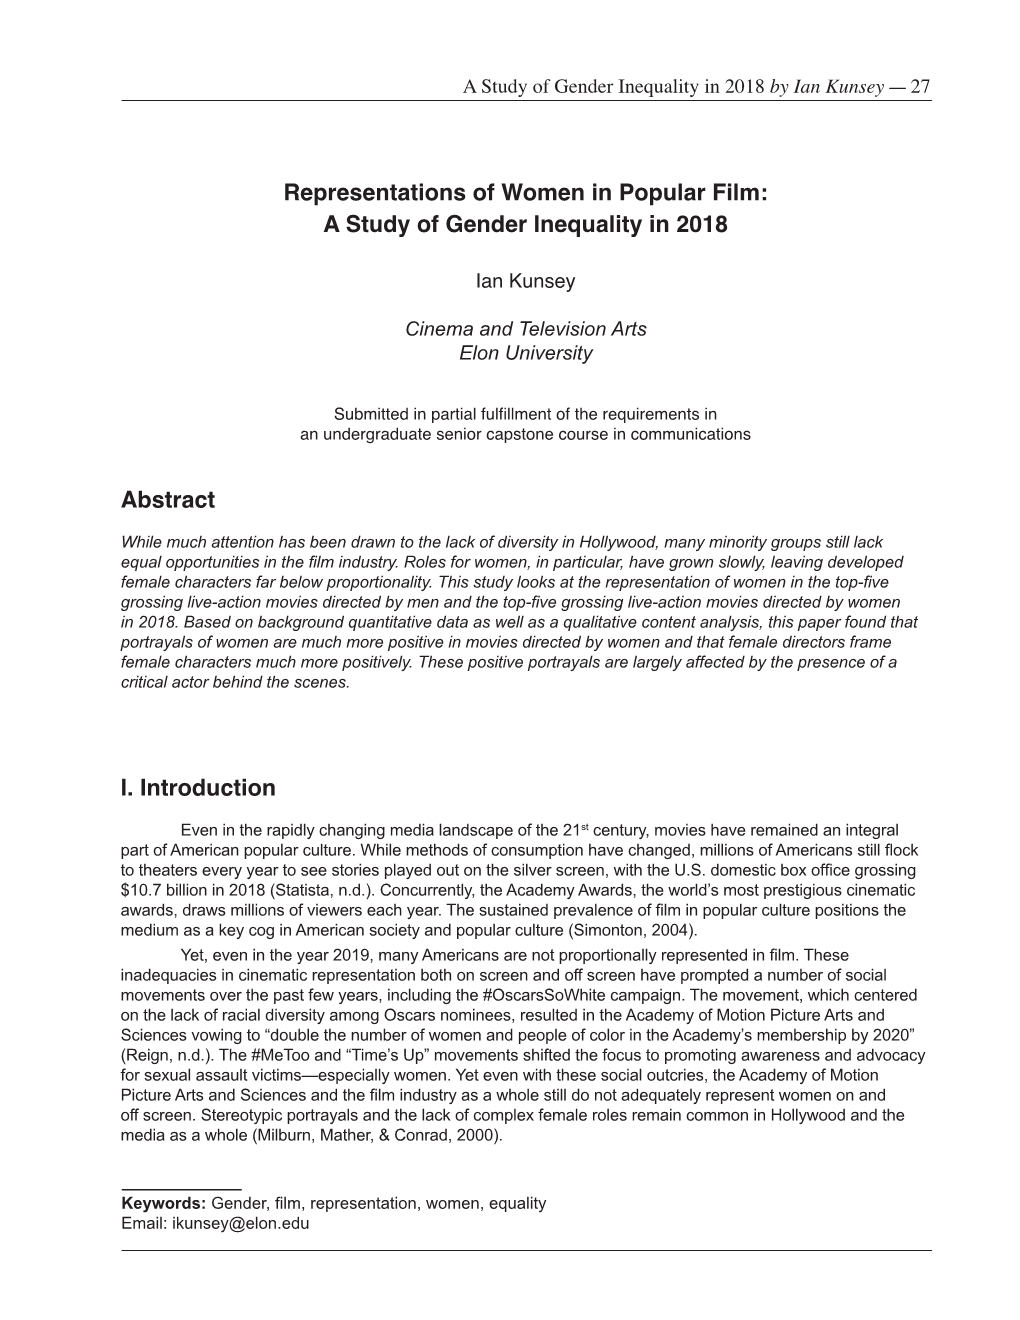 Representations of Women in Popular Film: a Study of Gender Inequality in 2018